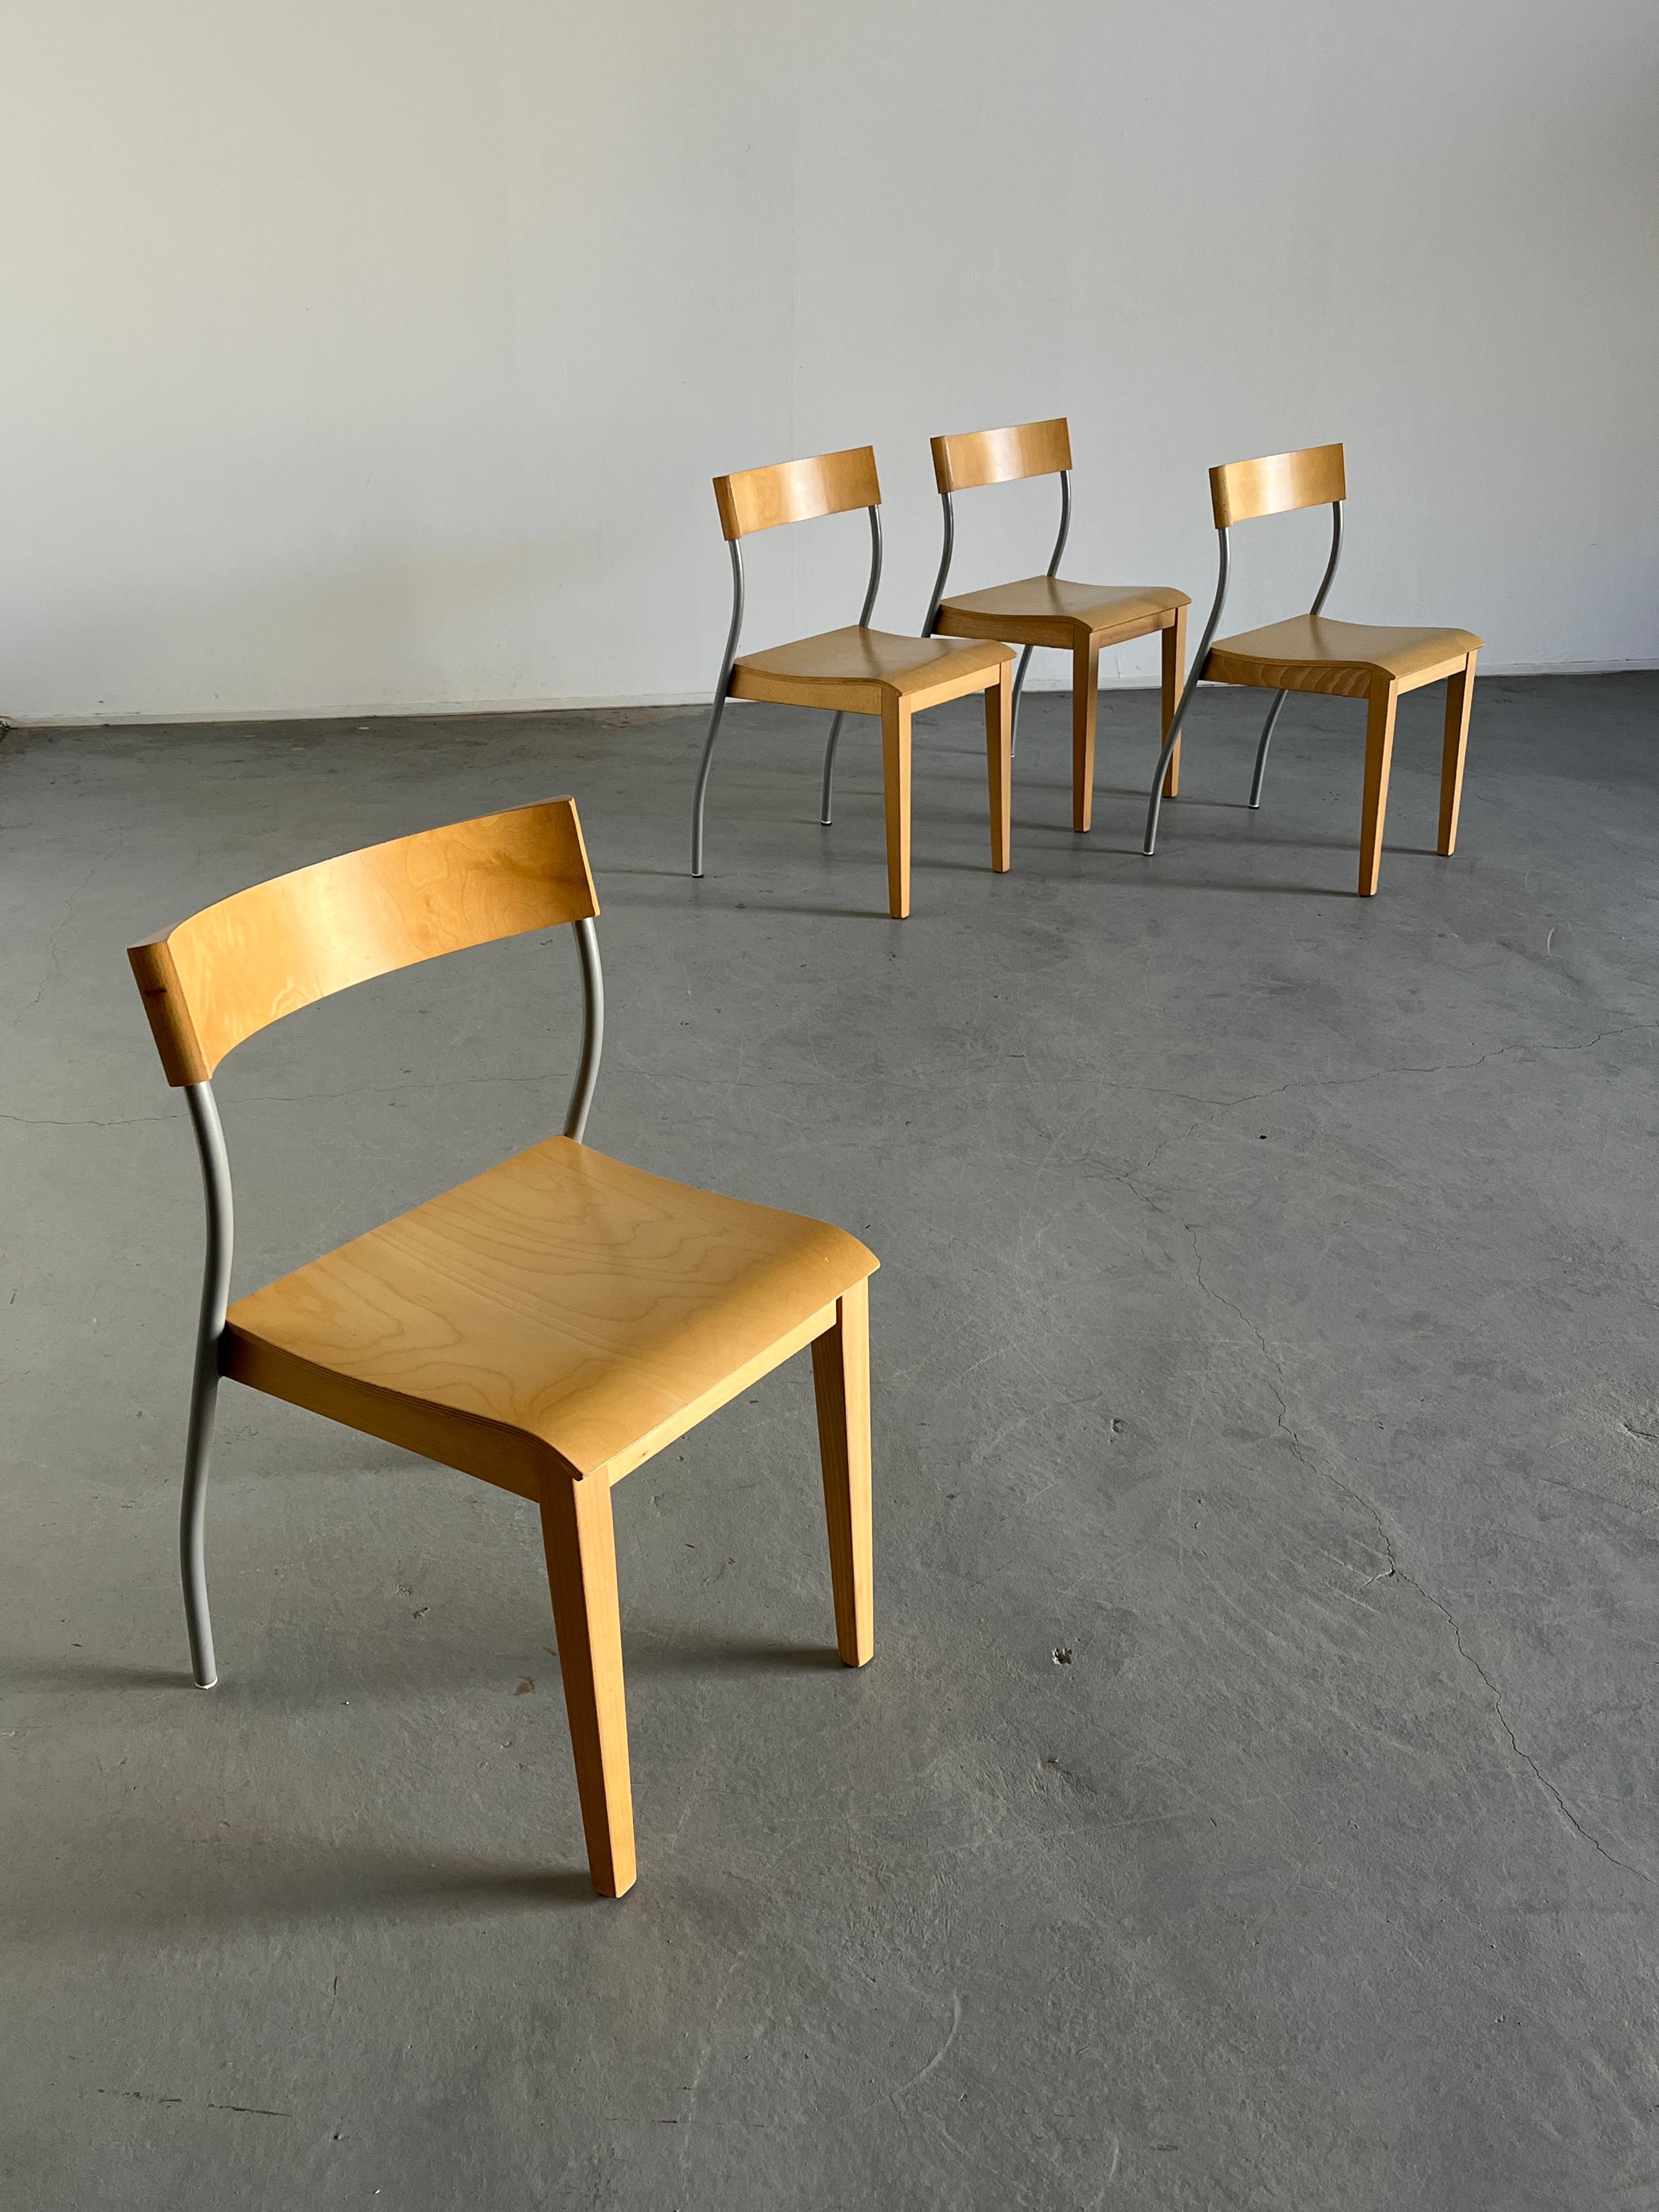 Steel Set of 4 Vintage Ikea 'Nordisk' Postmodern Dining Chairs by Tina Christensen